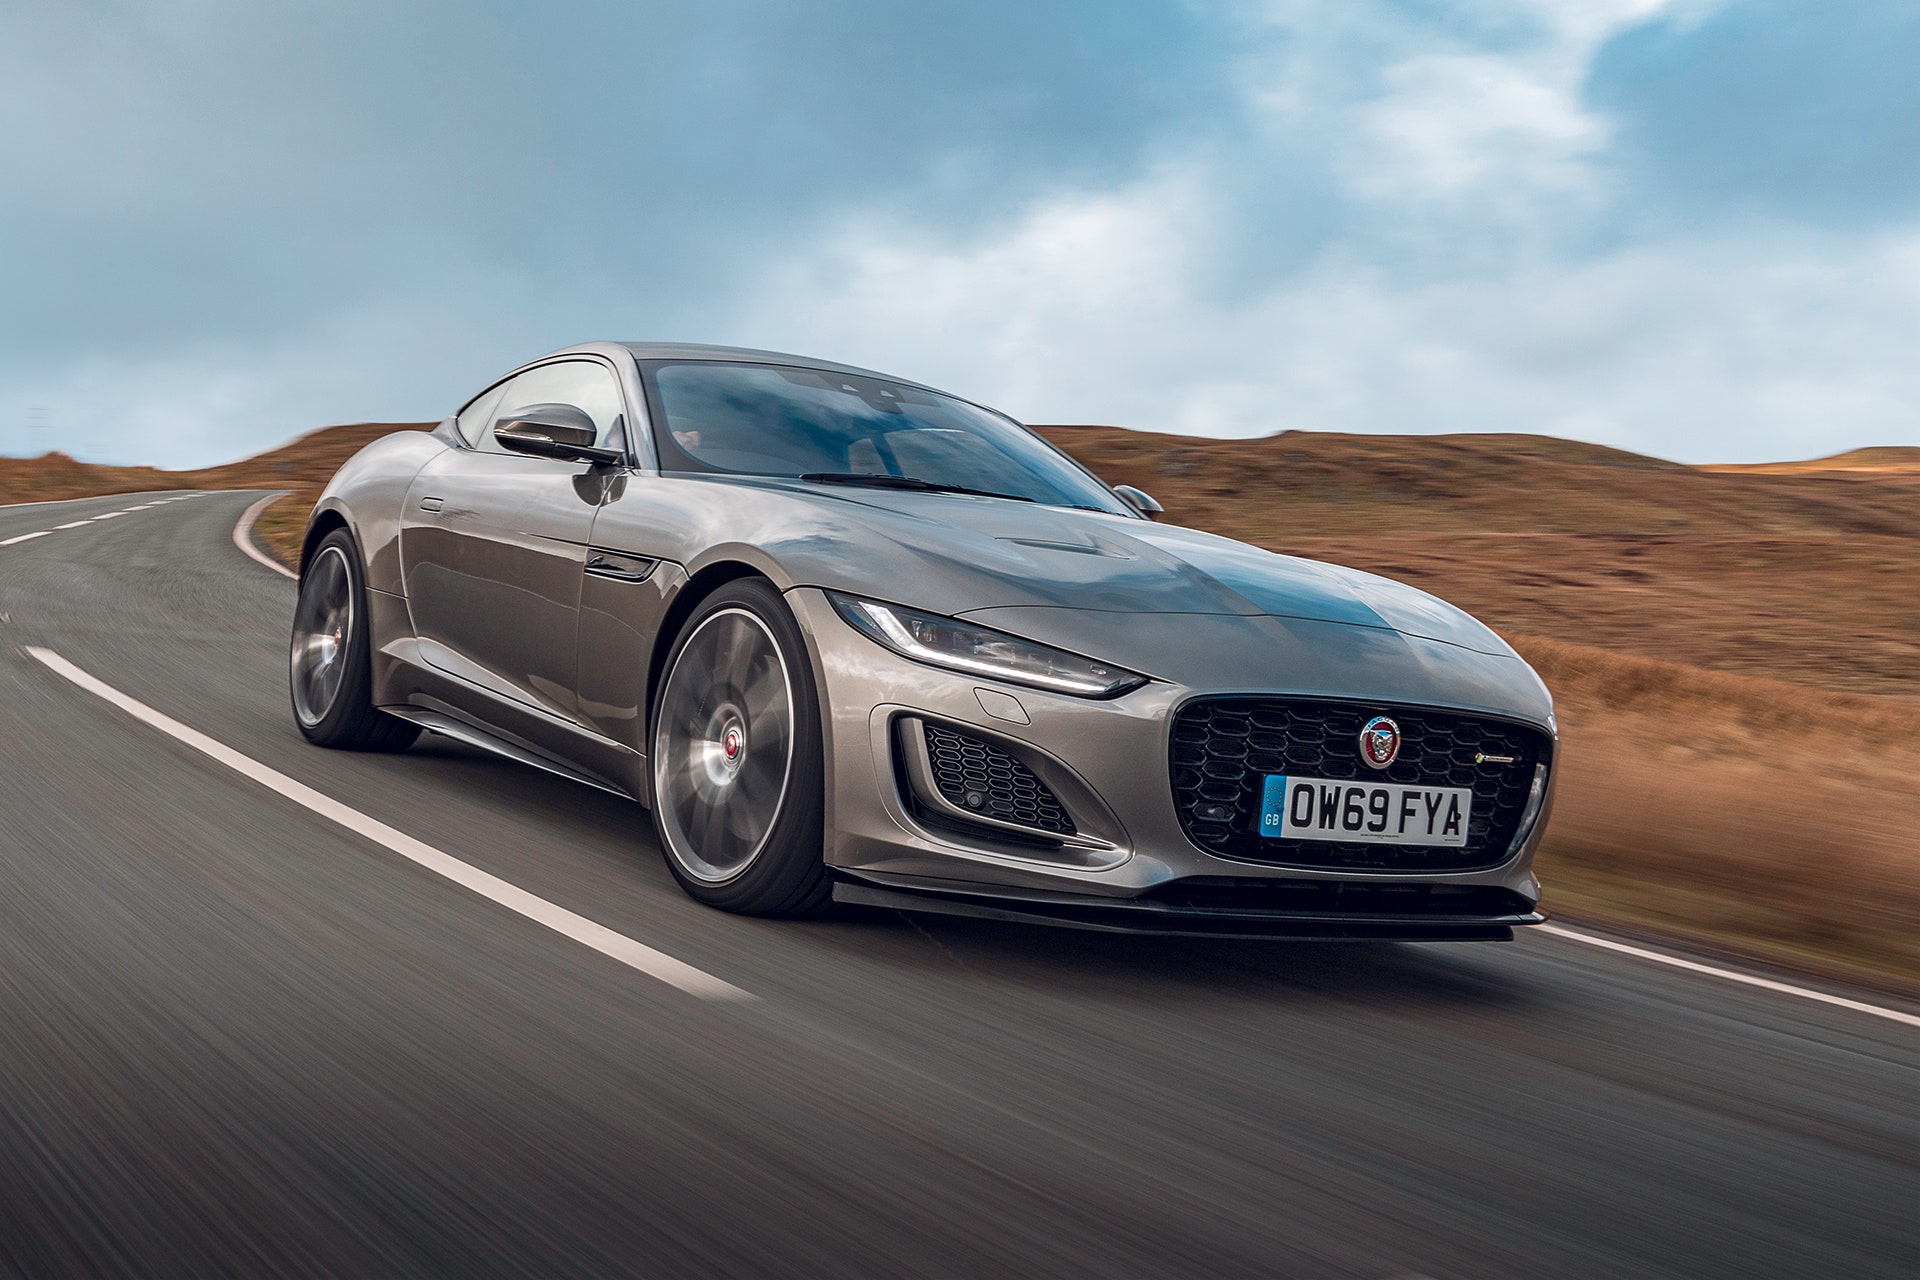 Jaguar F-Type review: an old-school car that's perfect for now | British GQ